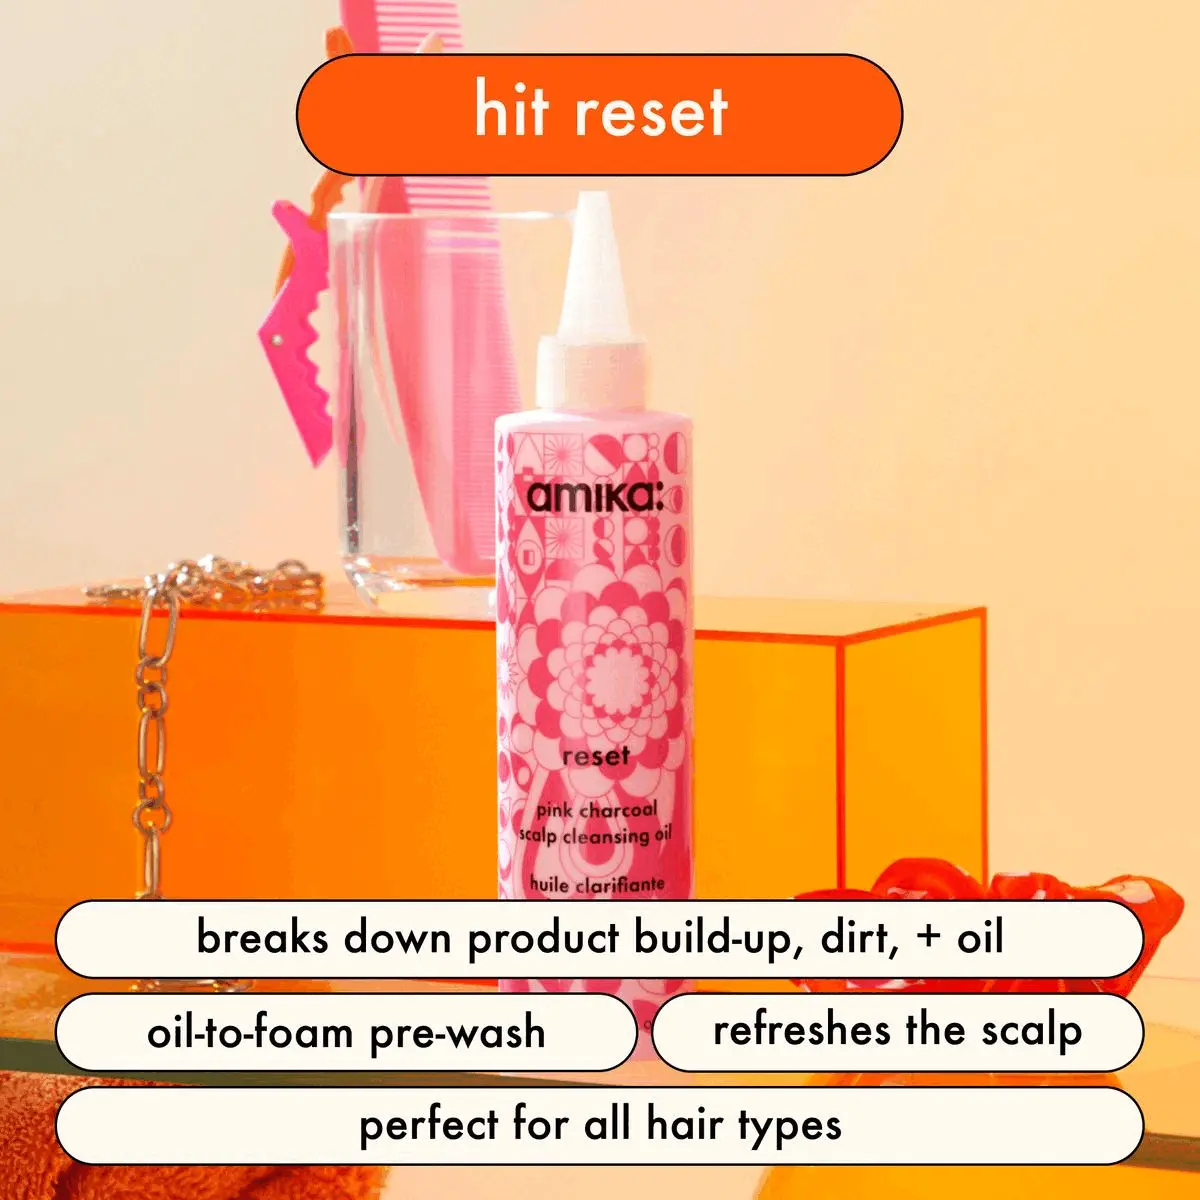 hit reset
              breaks down product build-up, dirt, + oil
              oil-to-foam pre-wash
              refreshes the scalp
              perfect for all hair types. let's break it down INDIAN CRESS
              promotes a balanced,
              healthier-looking scalp
              NATURAL CHARCOAL
              + PINK CLAY
              helps to get rid of
              impurities + odors,
              SUNFLOWER OIL
              helps to clean oil-
              soluble dirt + grime
              COOLING MENTHOL
              invigorates the scalp.
              Before, After hair untouched. great hair starts at the scalp
              clarify + remove
              buildup
              eset
              ifying
              el-shompoo
              hydrate + restore
              moisture balance
              pre-wash to break
              down product bulidup
              coollng gel
              conditioner
              r*oidissopt cn get
              telly ampoo
              exfoli
              exfoliate + deep clean. Before, After hair untouched.
              